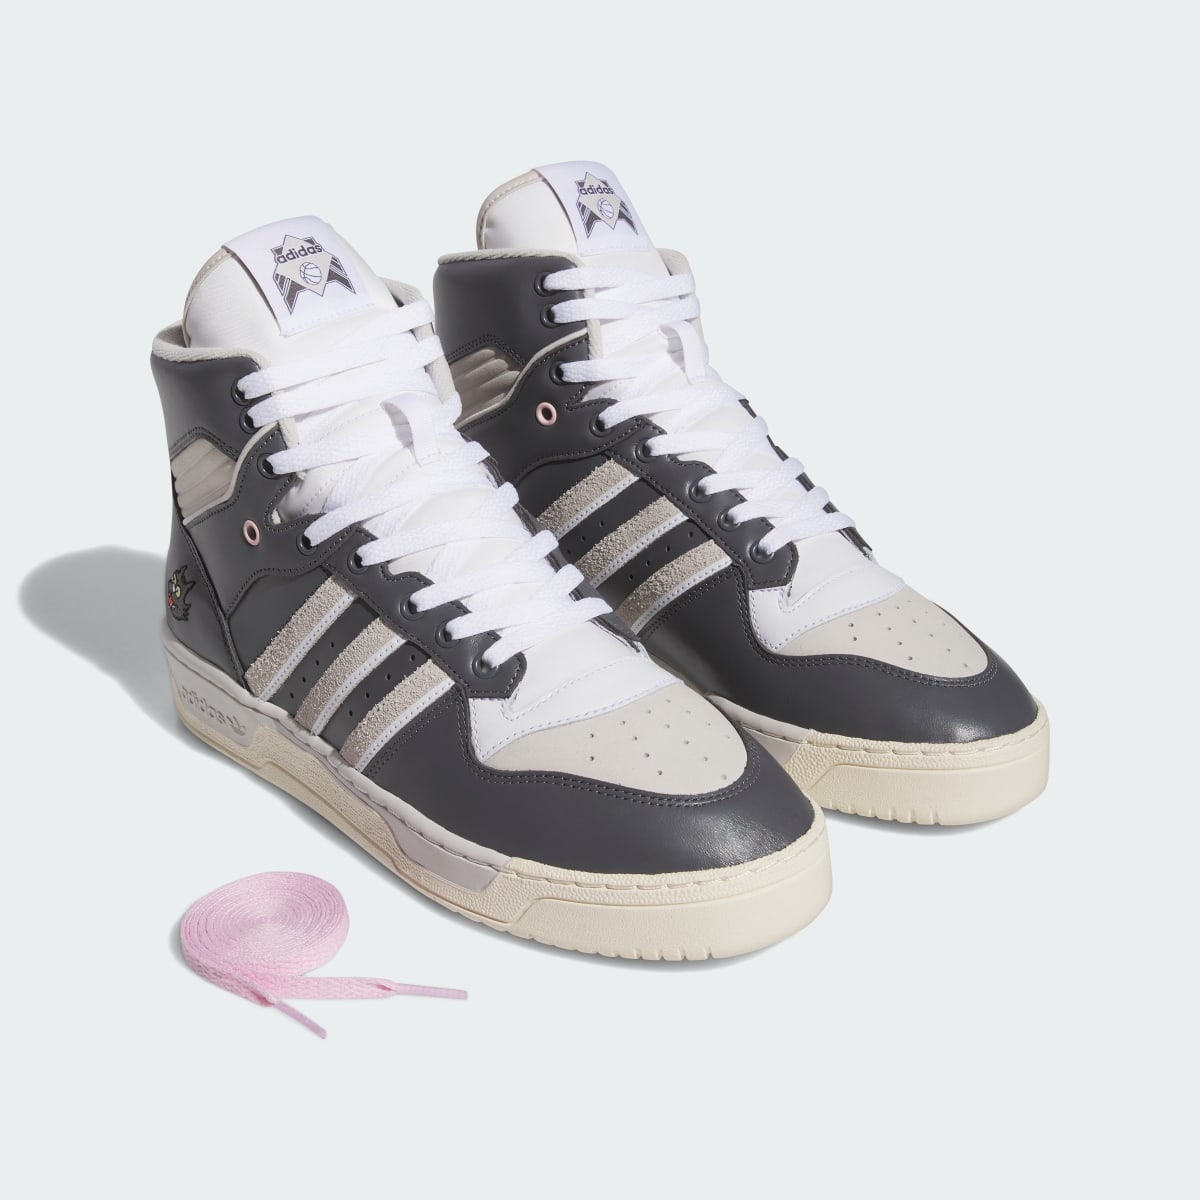 Adidas Rivalry High Scratchy Schuh. 12